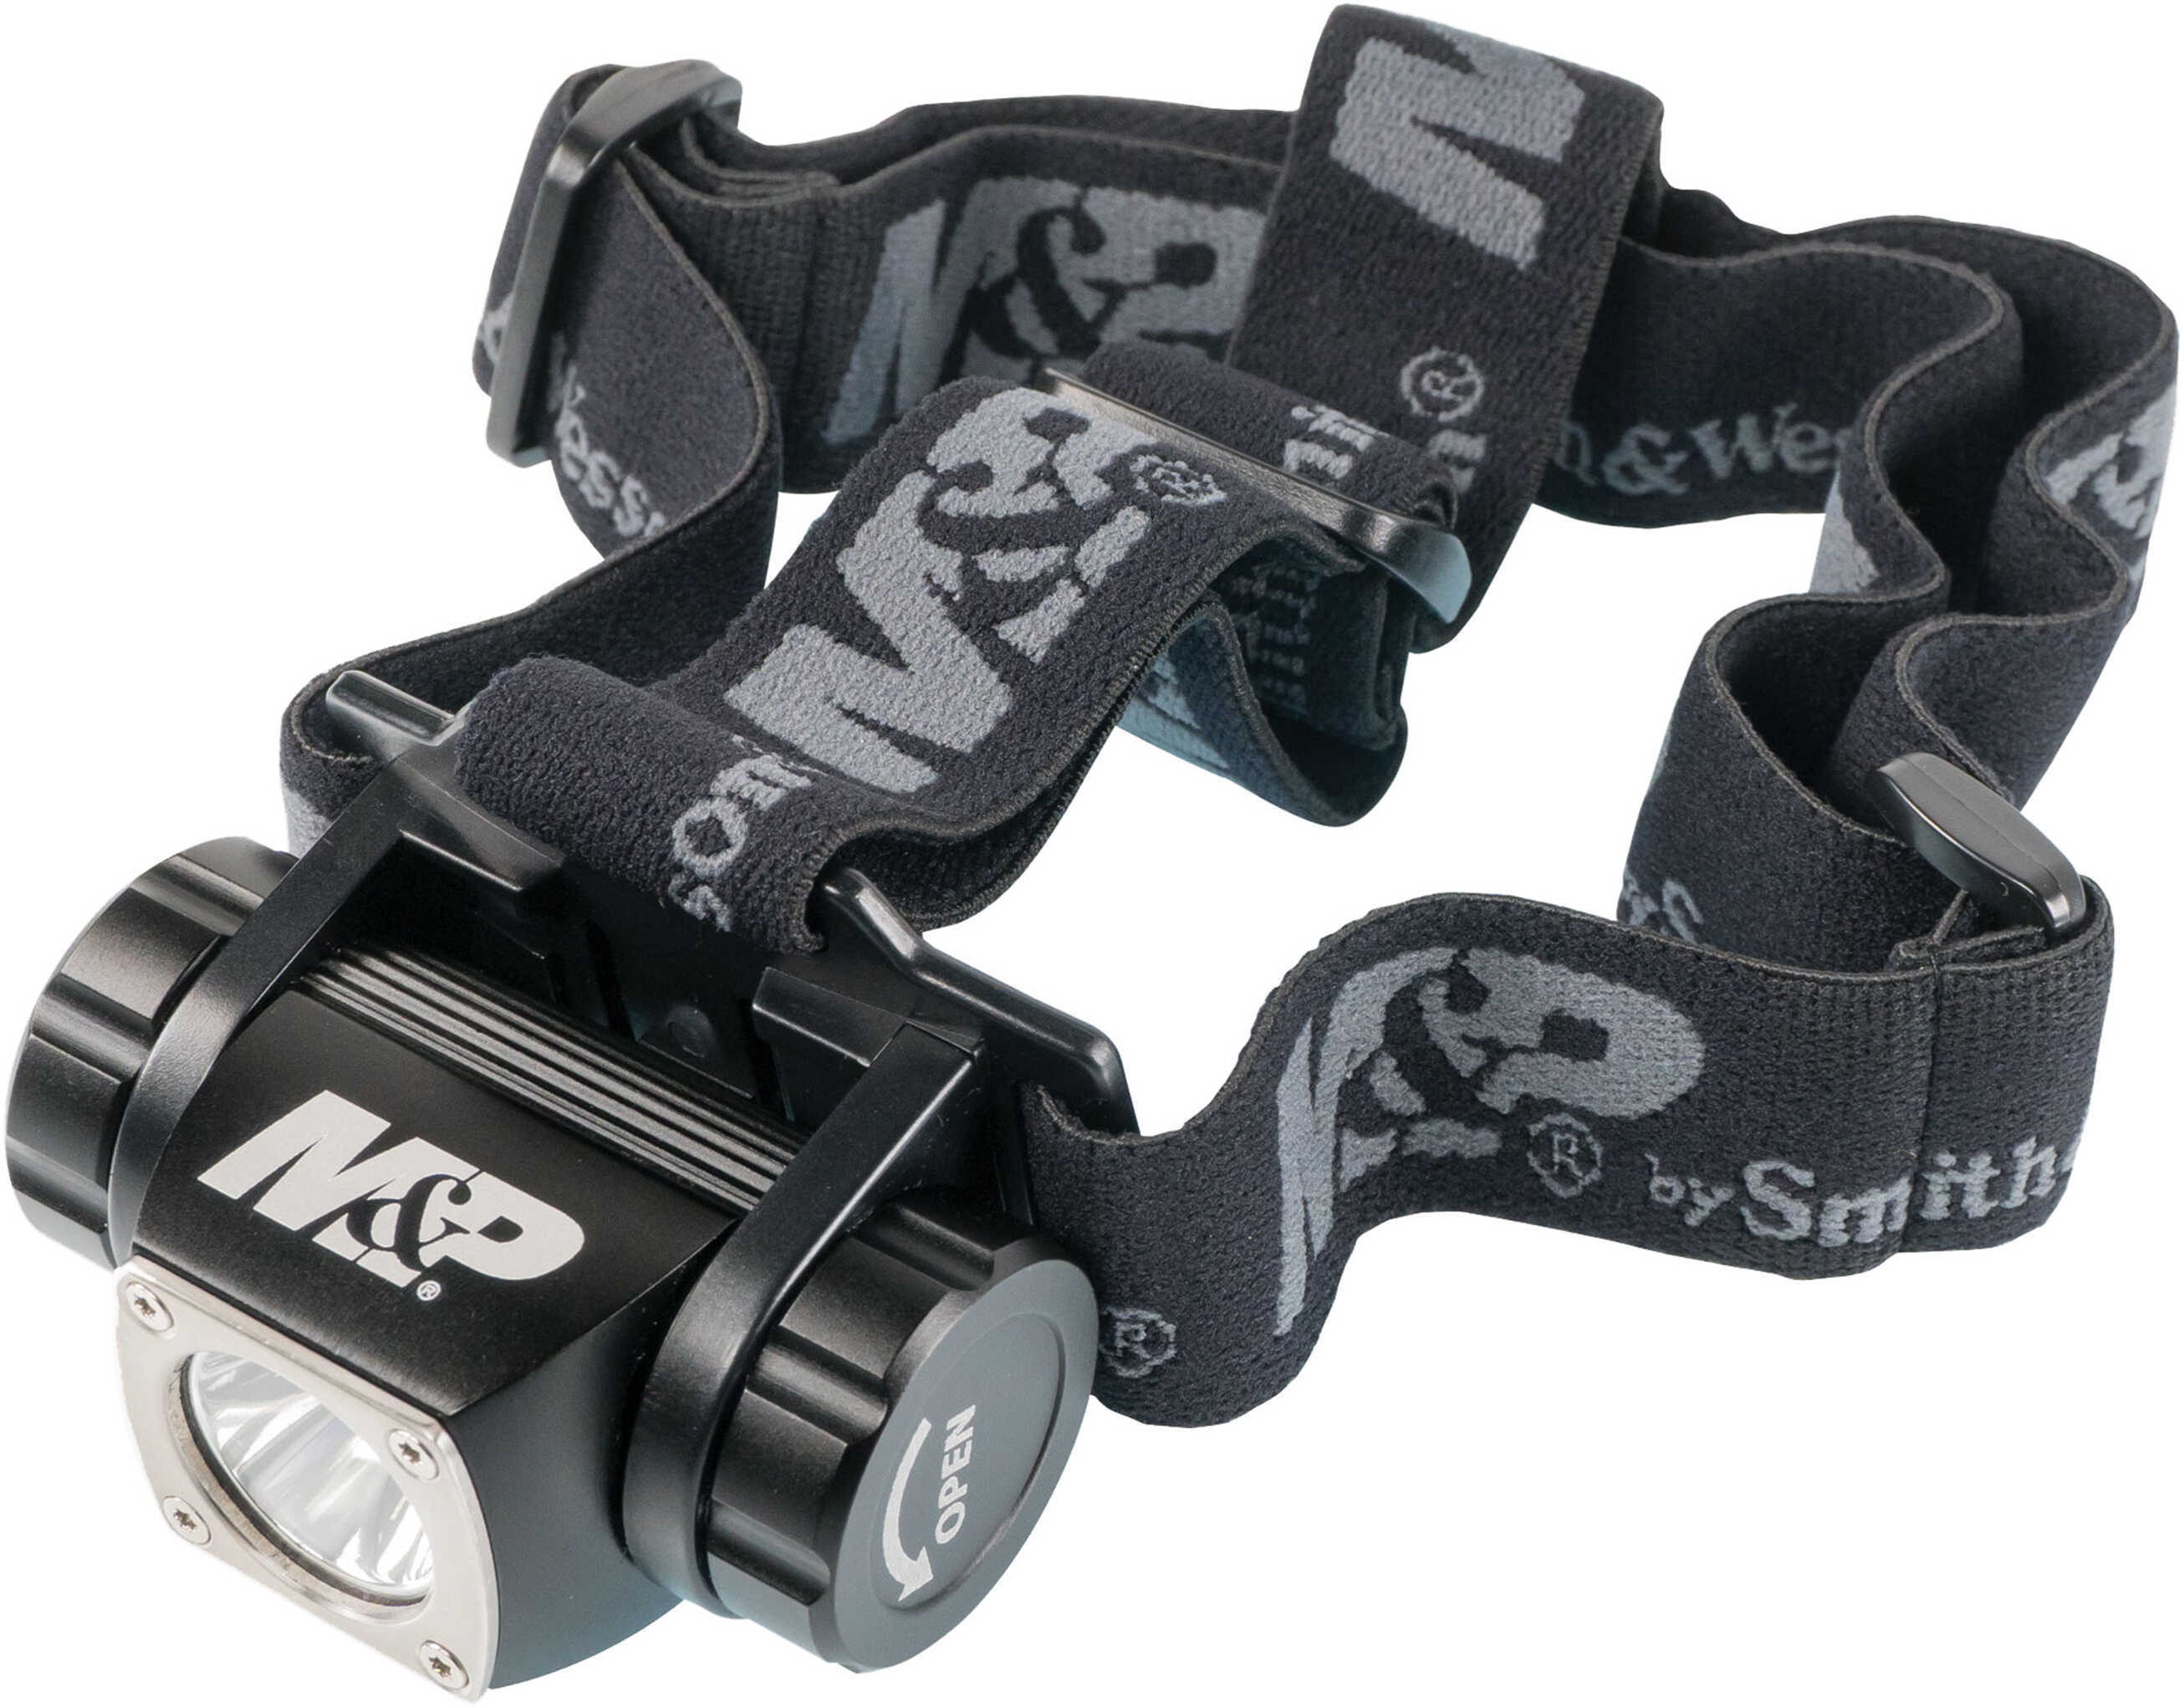 Smith & Wesson Accessories Delta Force Flashlight HL-10 Headlamp, LED with 3 AAA Batteries Aluminum Black Md: 11015